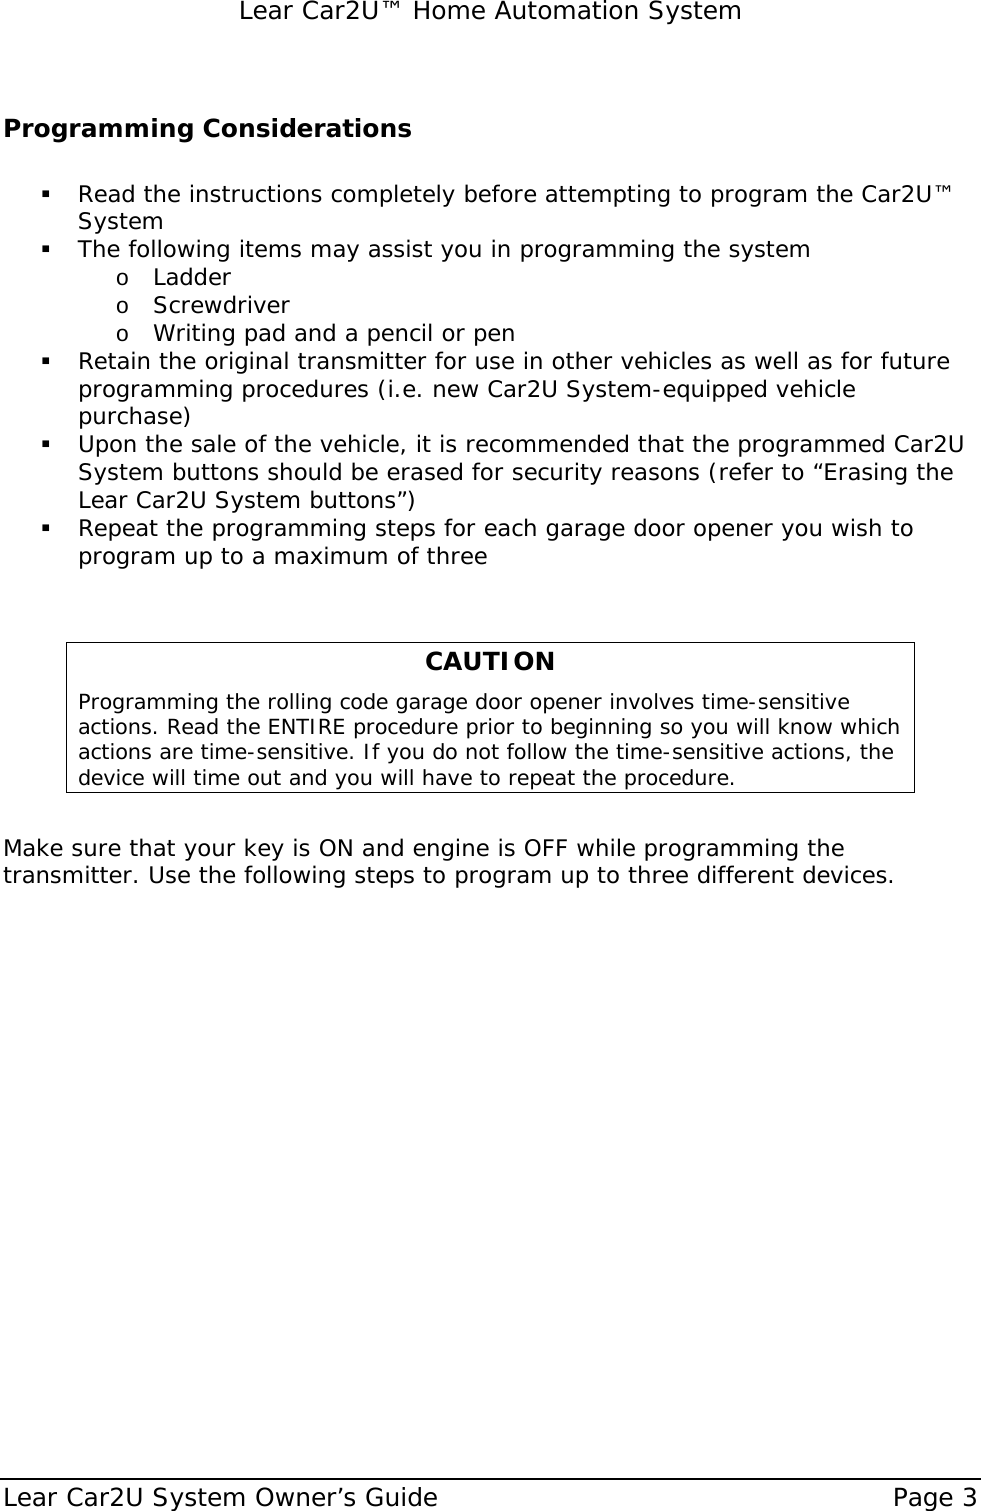   Lear Car2U™ Home Automation System Lear Car2U System Owner’s Guide    Page 3   Programming Considerations   ! Read the instructions completely before attempting to program the Car2U™ System   ! The following items may assist you in programming the system o Ladder o Screwdriver o Writing pad and a pencil or pen  ! Retain the original transmitter for use in other vehicles as well as for future programming procedures (i.e. new Car2U System-equipped vehicle purchase) ! Upon the sale of the vehicle, it is recommended that the programmed Car2U System buttons should be erased for security reasons (refer to “Erasing the Lear Car2U System buttons”) ! Repeat the programming steps for each garage door opener you wish to program up to a maximum of three   CAUTION Programming the rolling code garage door opener involves time-sensitive actions. Read the ENTIRE procedure prior to beginning so you will know which actions are time-sensitive. If you do not follow the time-sensitive actions, the device will time out and you will have to repeat the procedure.  Make sure that your key is ON and engine is OFF while programming the transmitter. Use the following steps to program up to three different devices.   